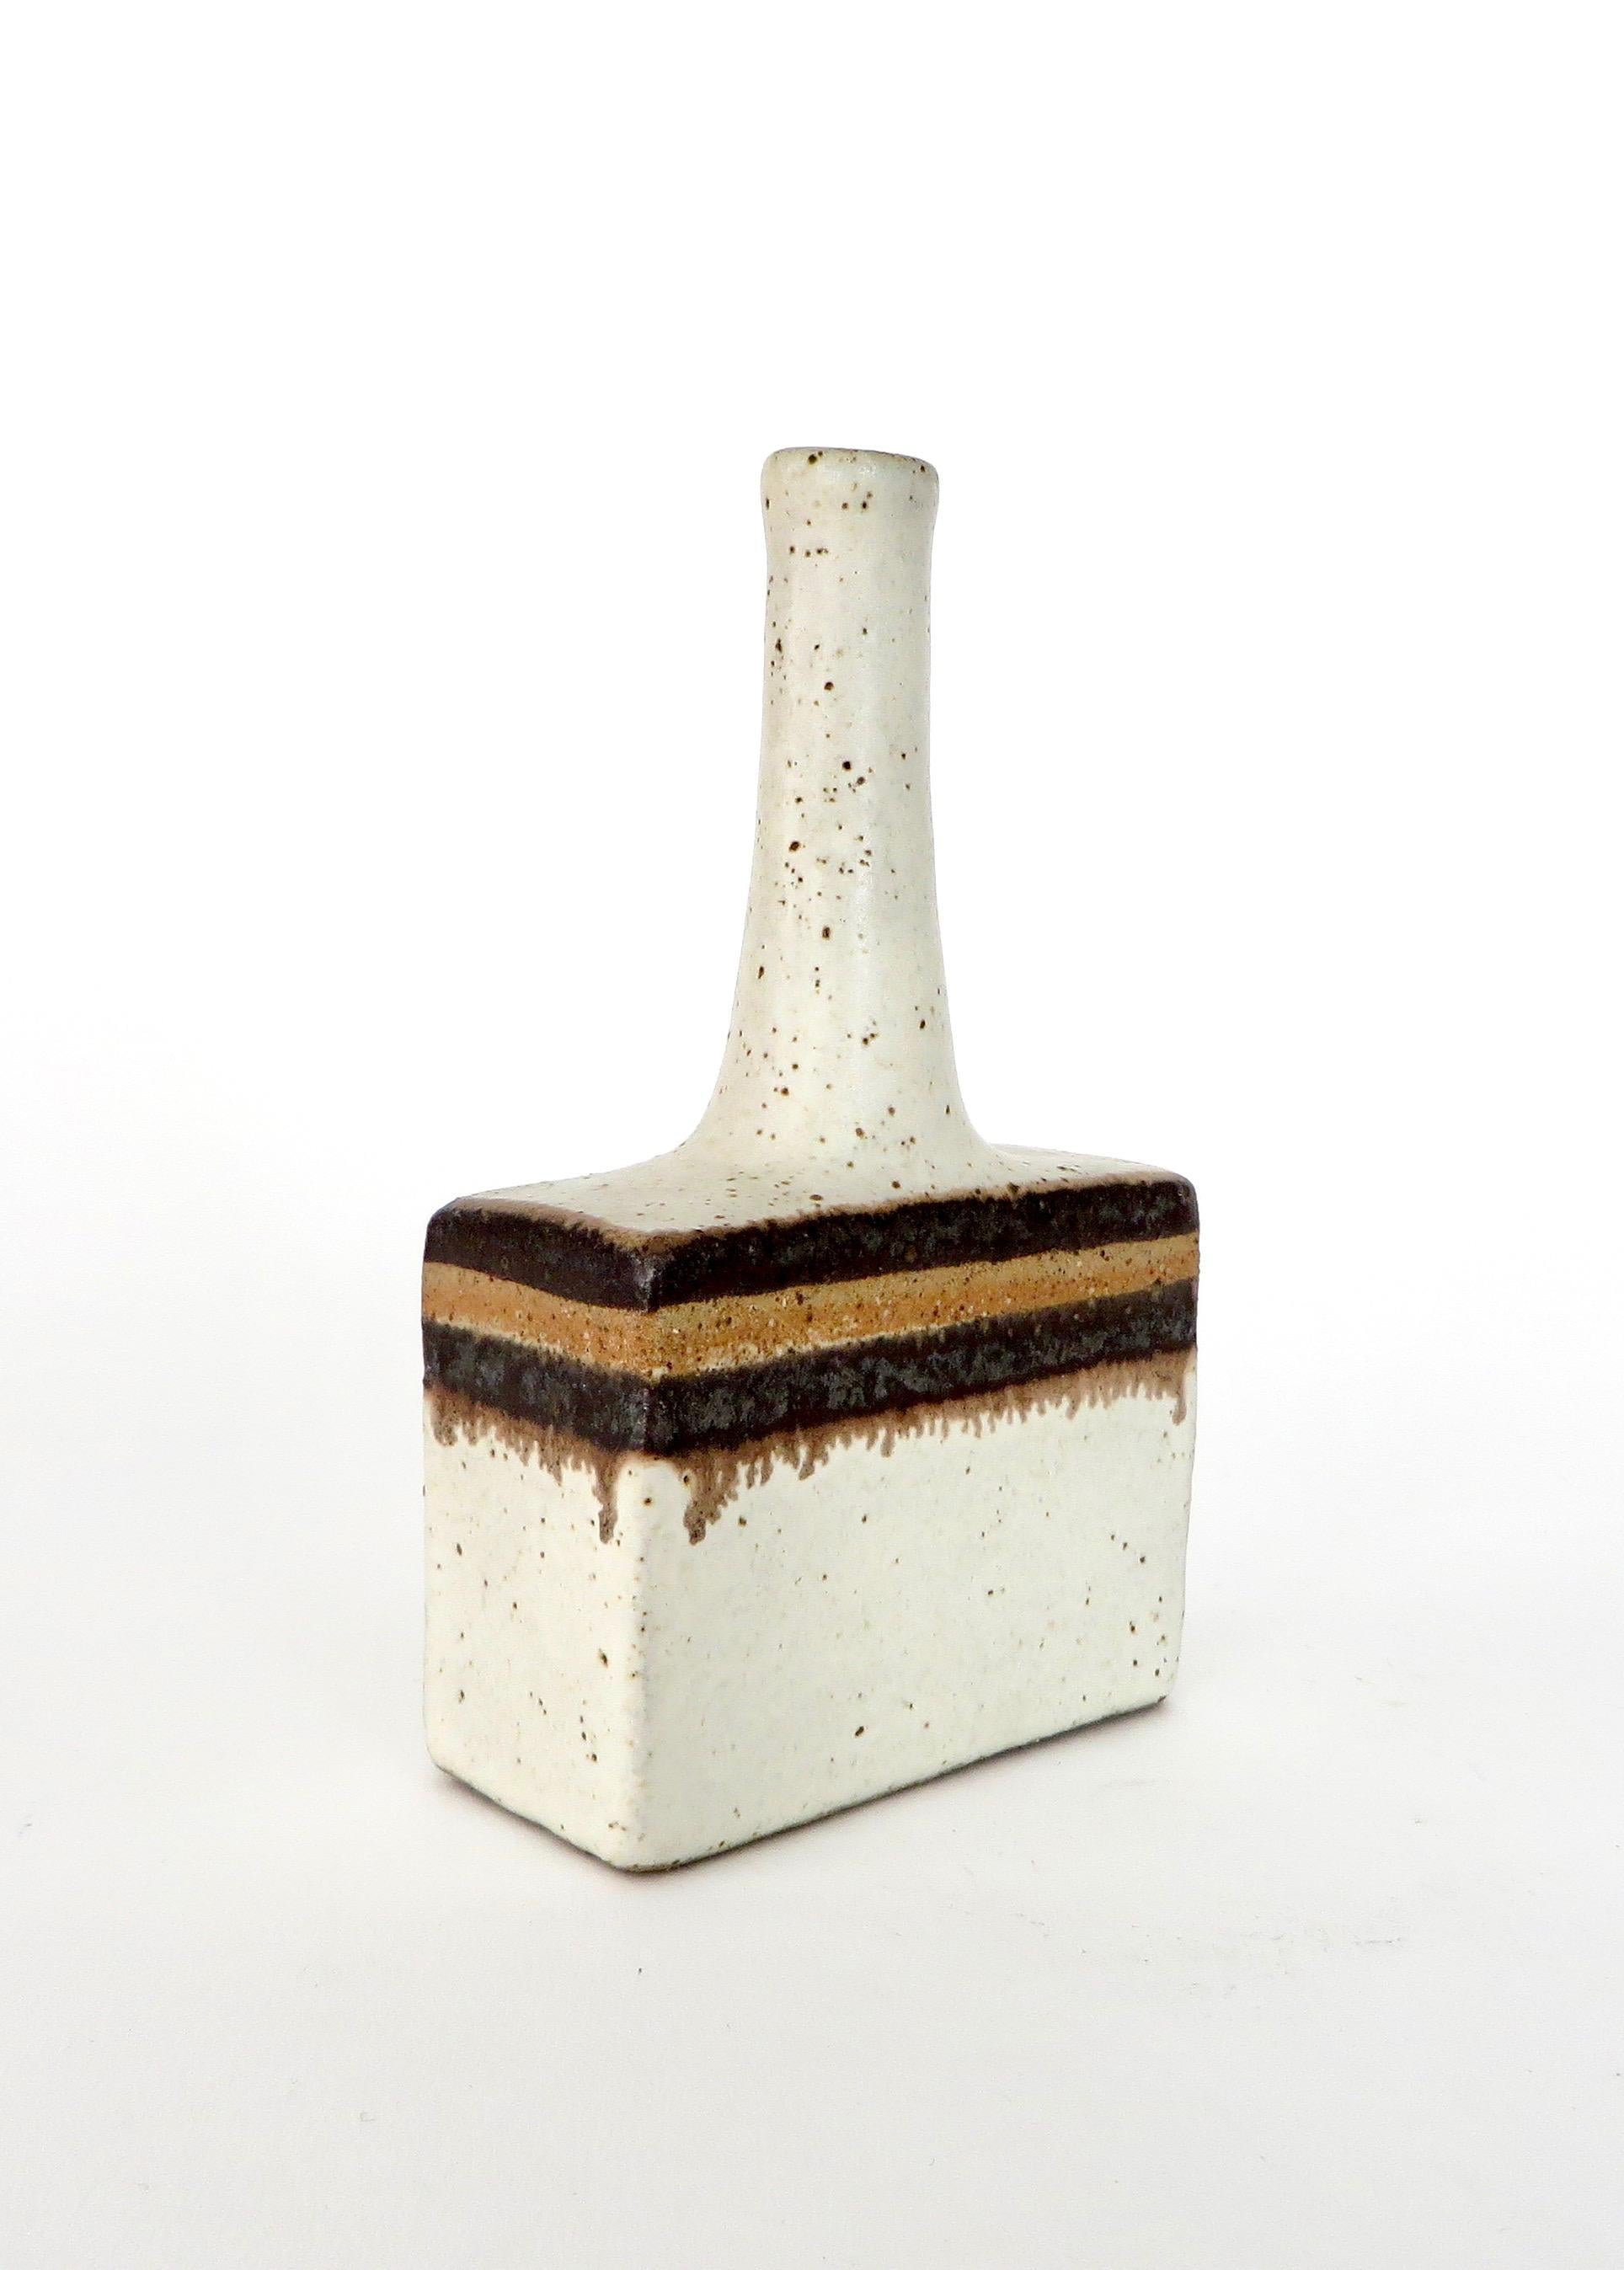 Bruno Gambone decorative ceramic mini bottle-shaped vessel with chalk-white surface and chocolate and light brown glazed ribbon motif by (circa 1970s). With a modern rectangular base and lean, elongated neck its shape and finish have their origins